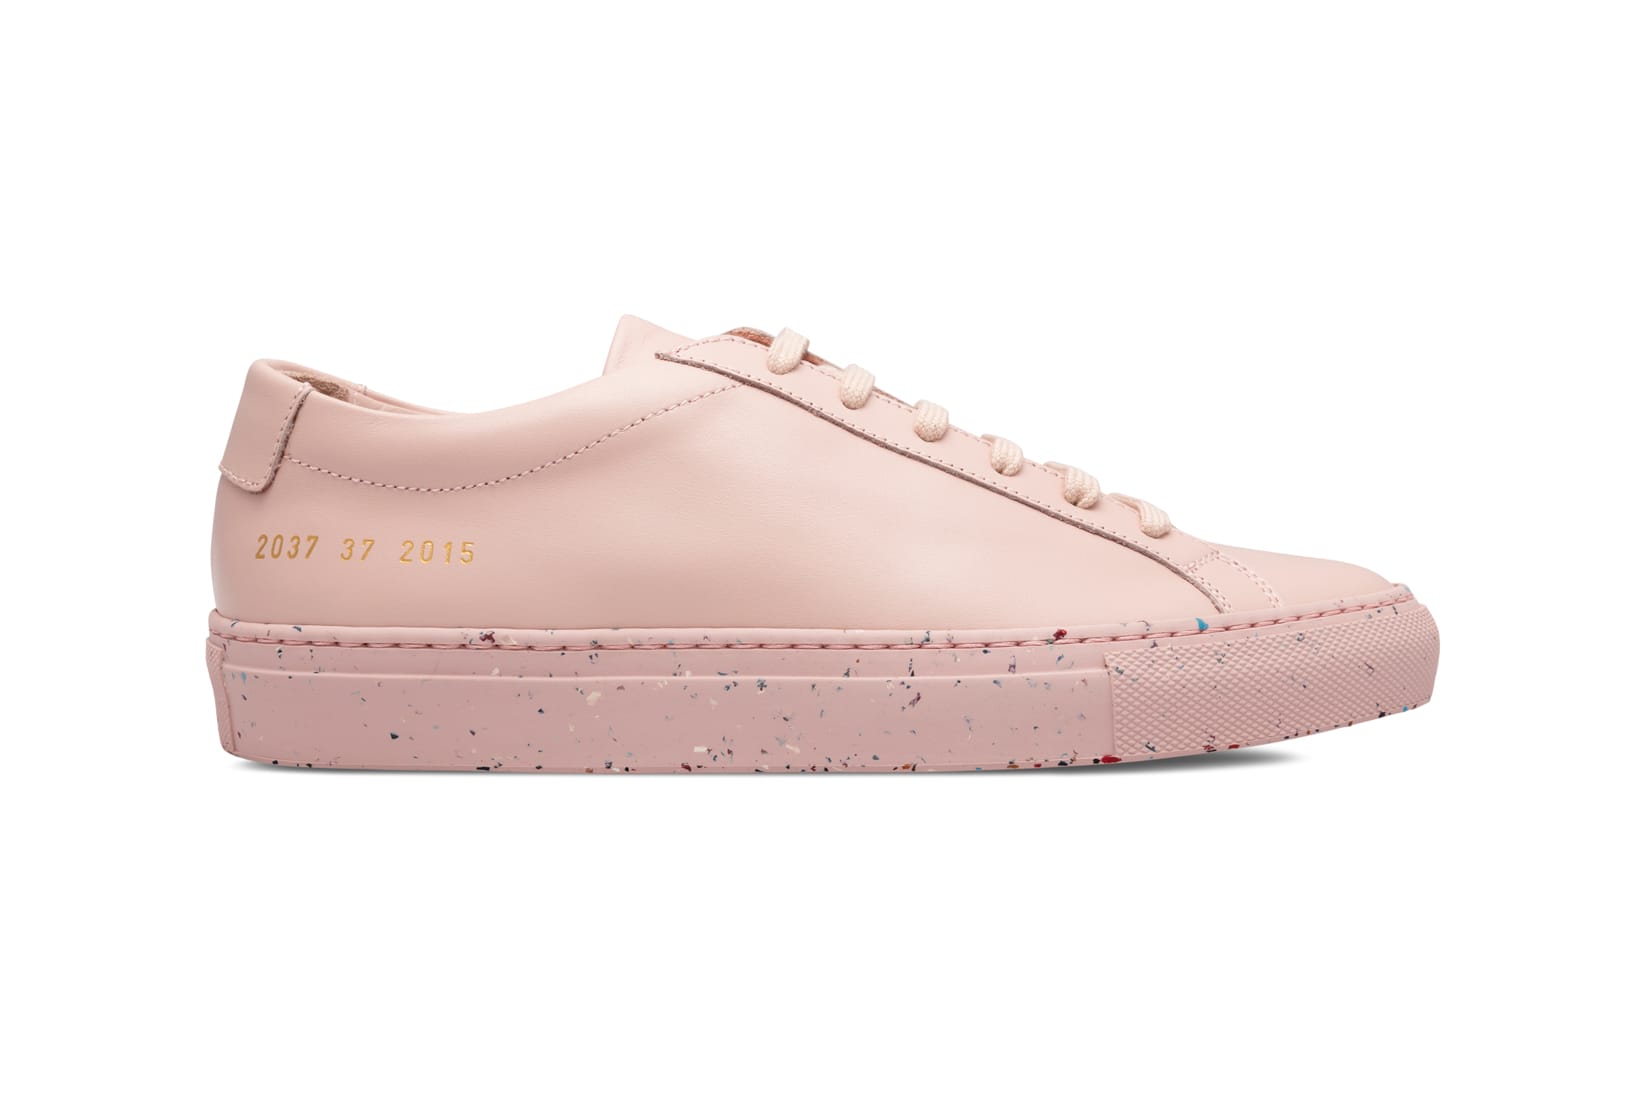 dover street market common projects